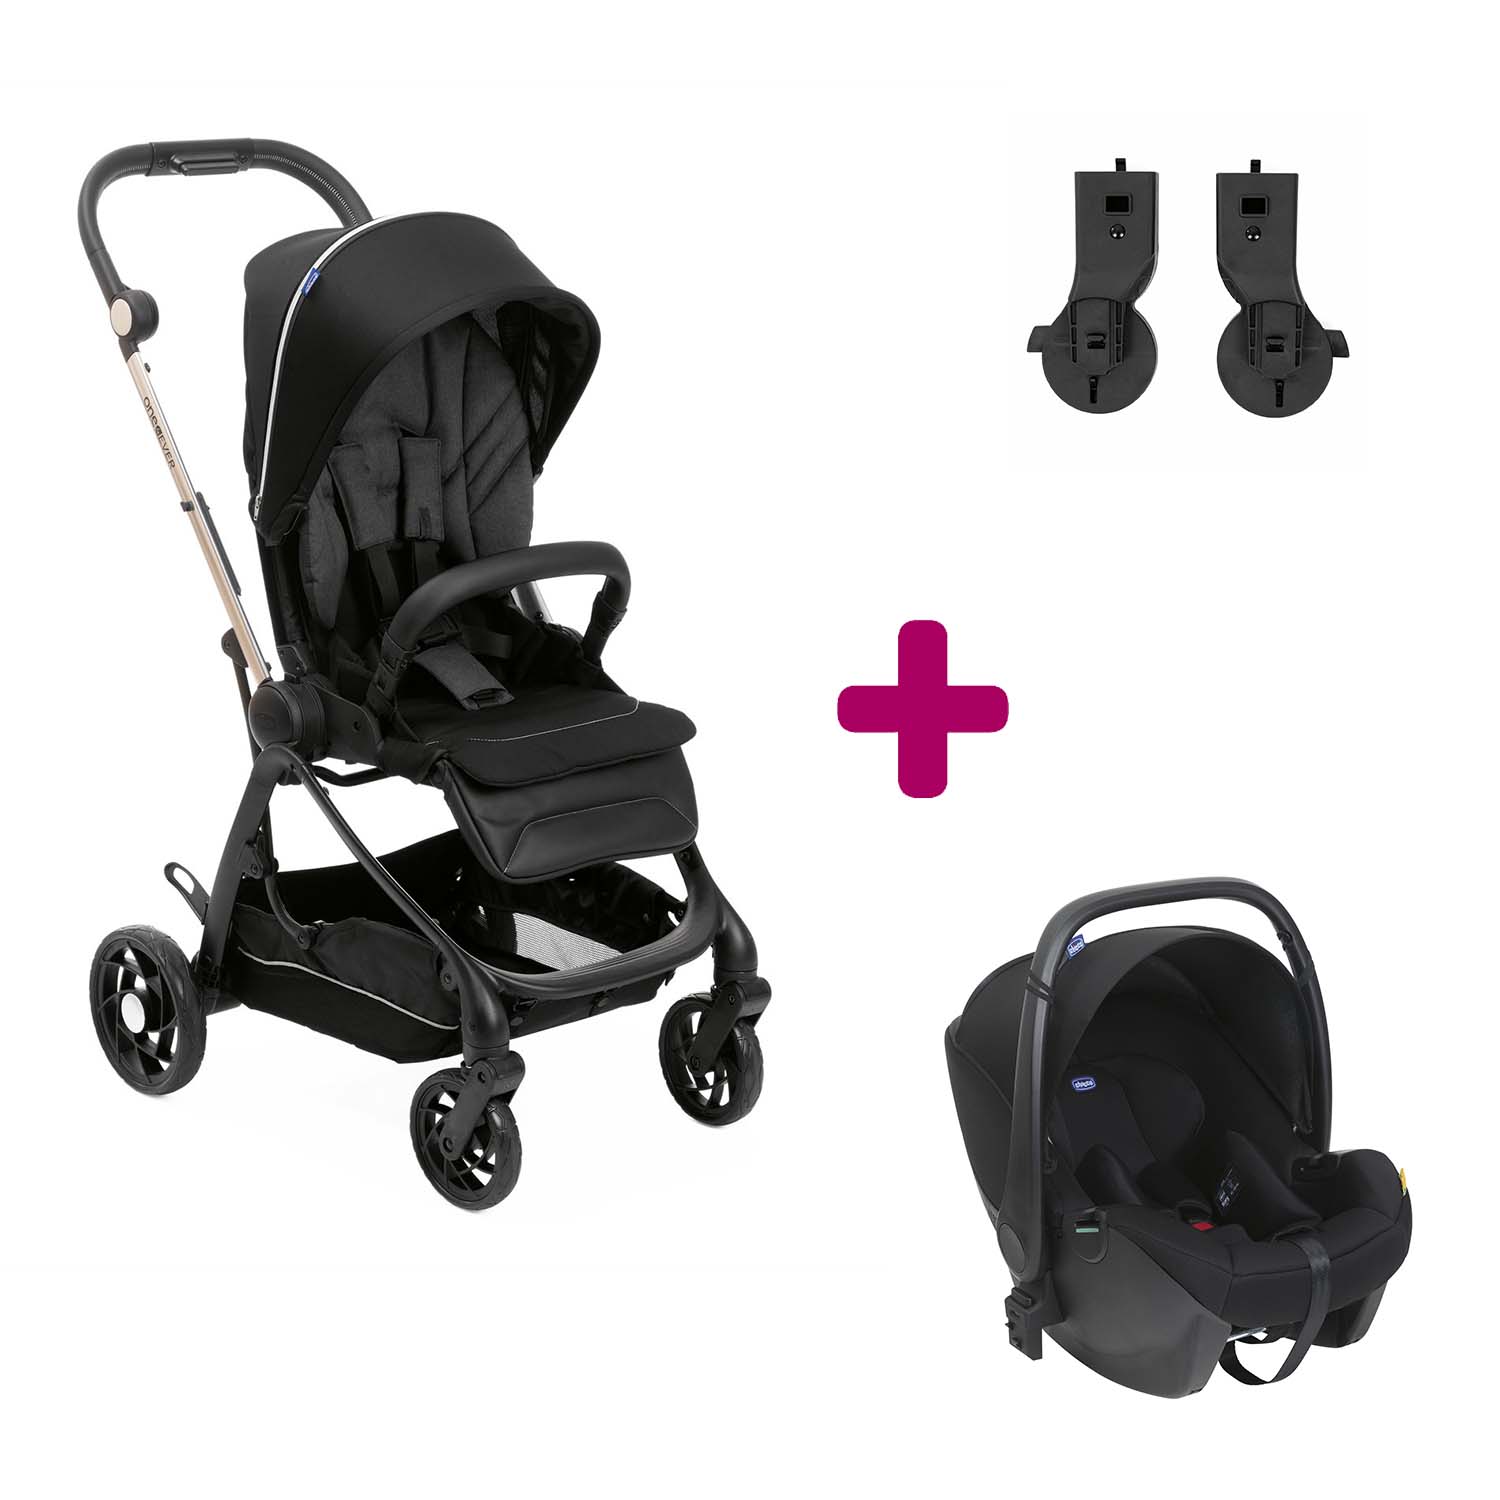 Pack poussette Duo One4ever Siège auto + adaptateurs pirate black Chicco